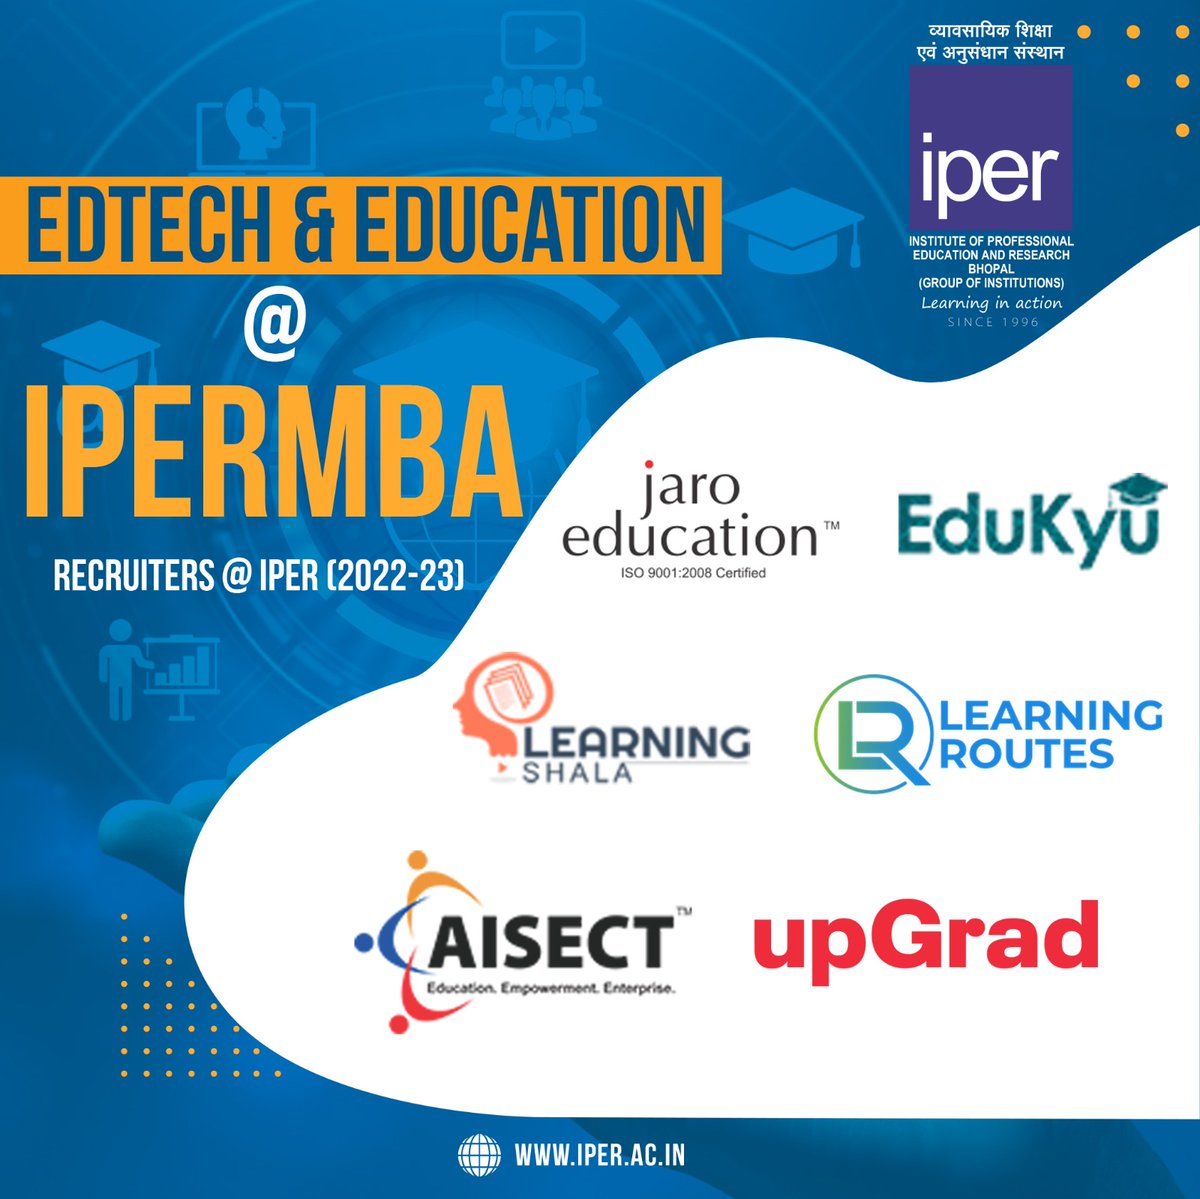 🌟 IPER-MBA students Excel in the EdTech and Education Sector! 🌟

Join us in celebrating their accomplishments and wishing them success in their noble pursuit of empowering minds! 🌟💪

#IPER #MBA #JaroEducation #EduKyu #LearningShala #LearningRoutes #AISECT #upGrad #Bhopal